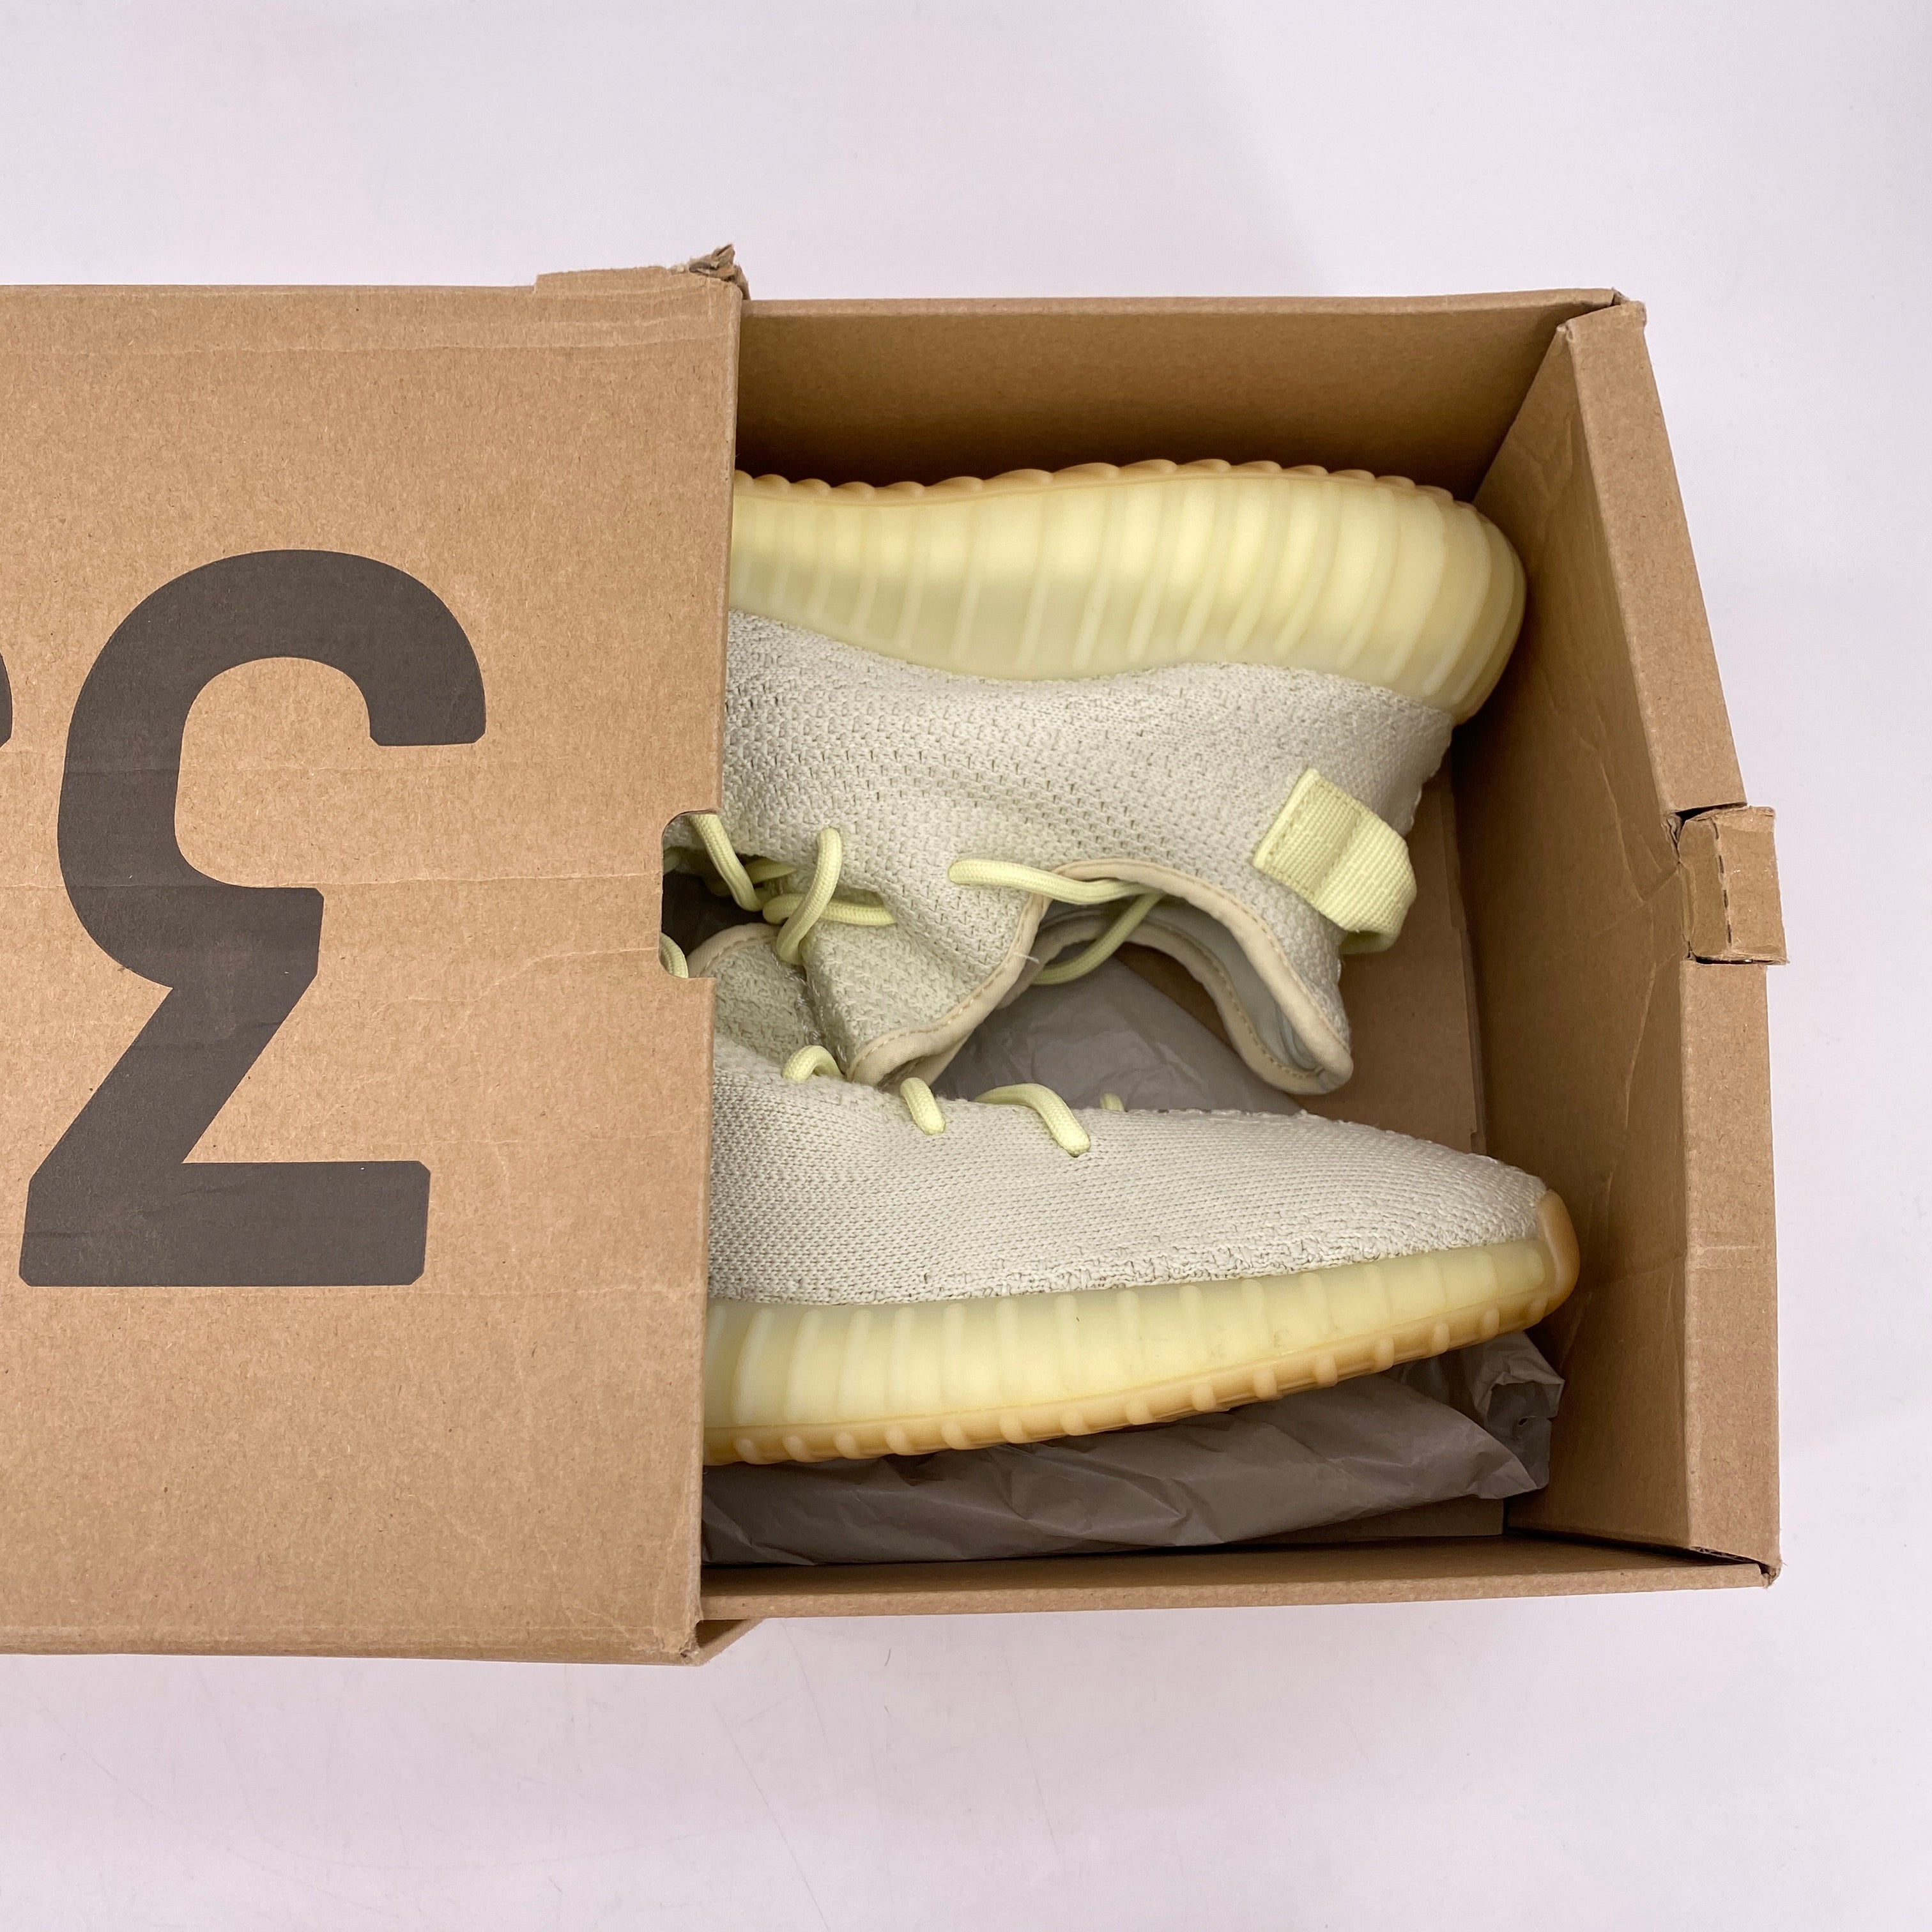 Yeezy 350 v2 "Butter" 2018 Used Size 10